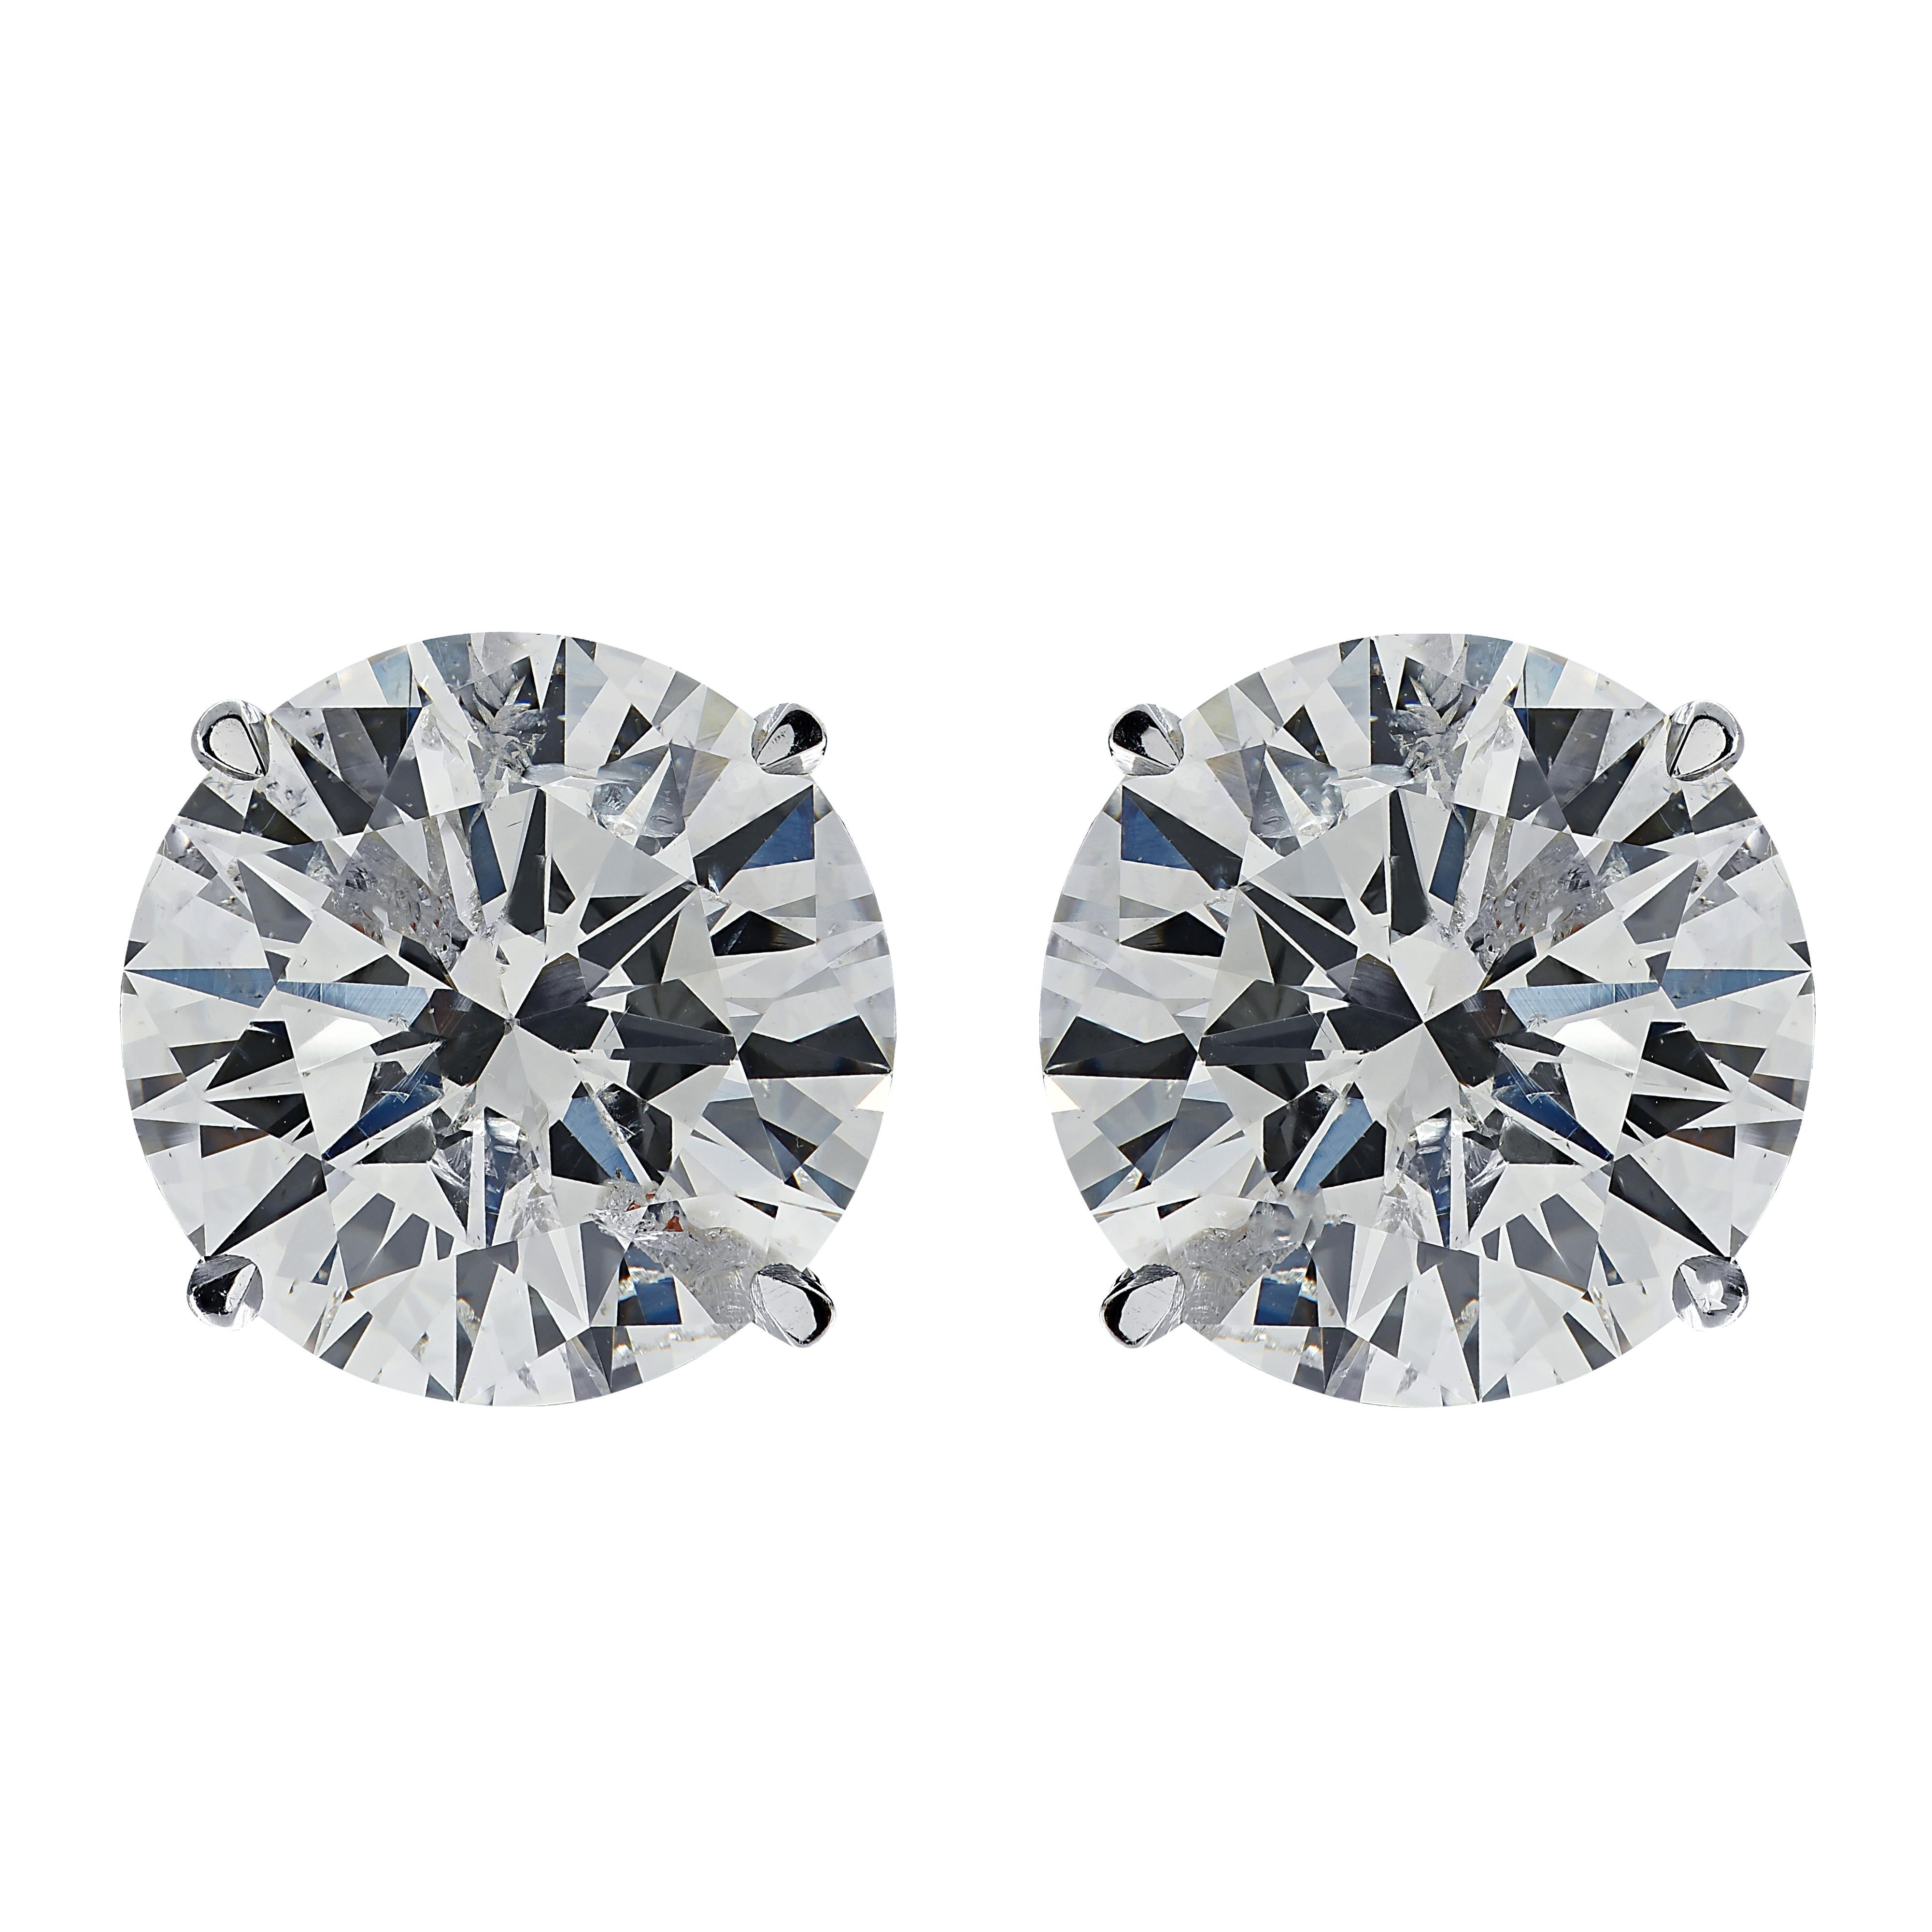 Stunning Vivid Diamonds solitaire stud earrings crafted in white gold, showcasing 2 spectacular GIA Certified round brilliant cut diamonds weighing 6.02 carats total, G-H color I1 clarity. These diamonds were carefully selected and perfectly matched